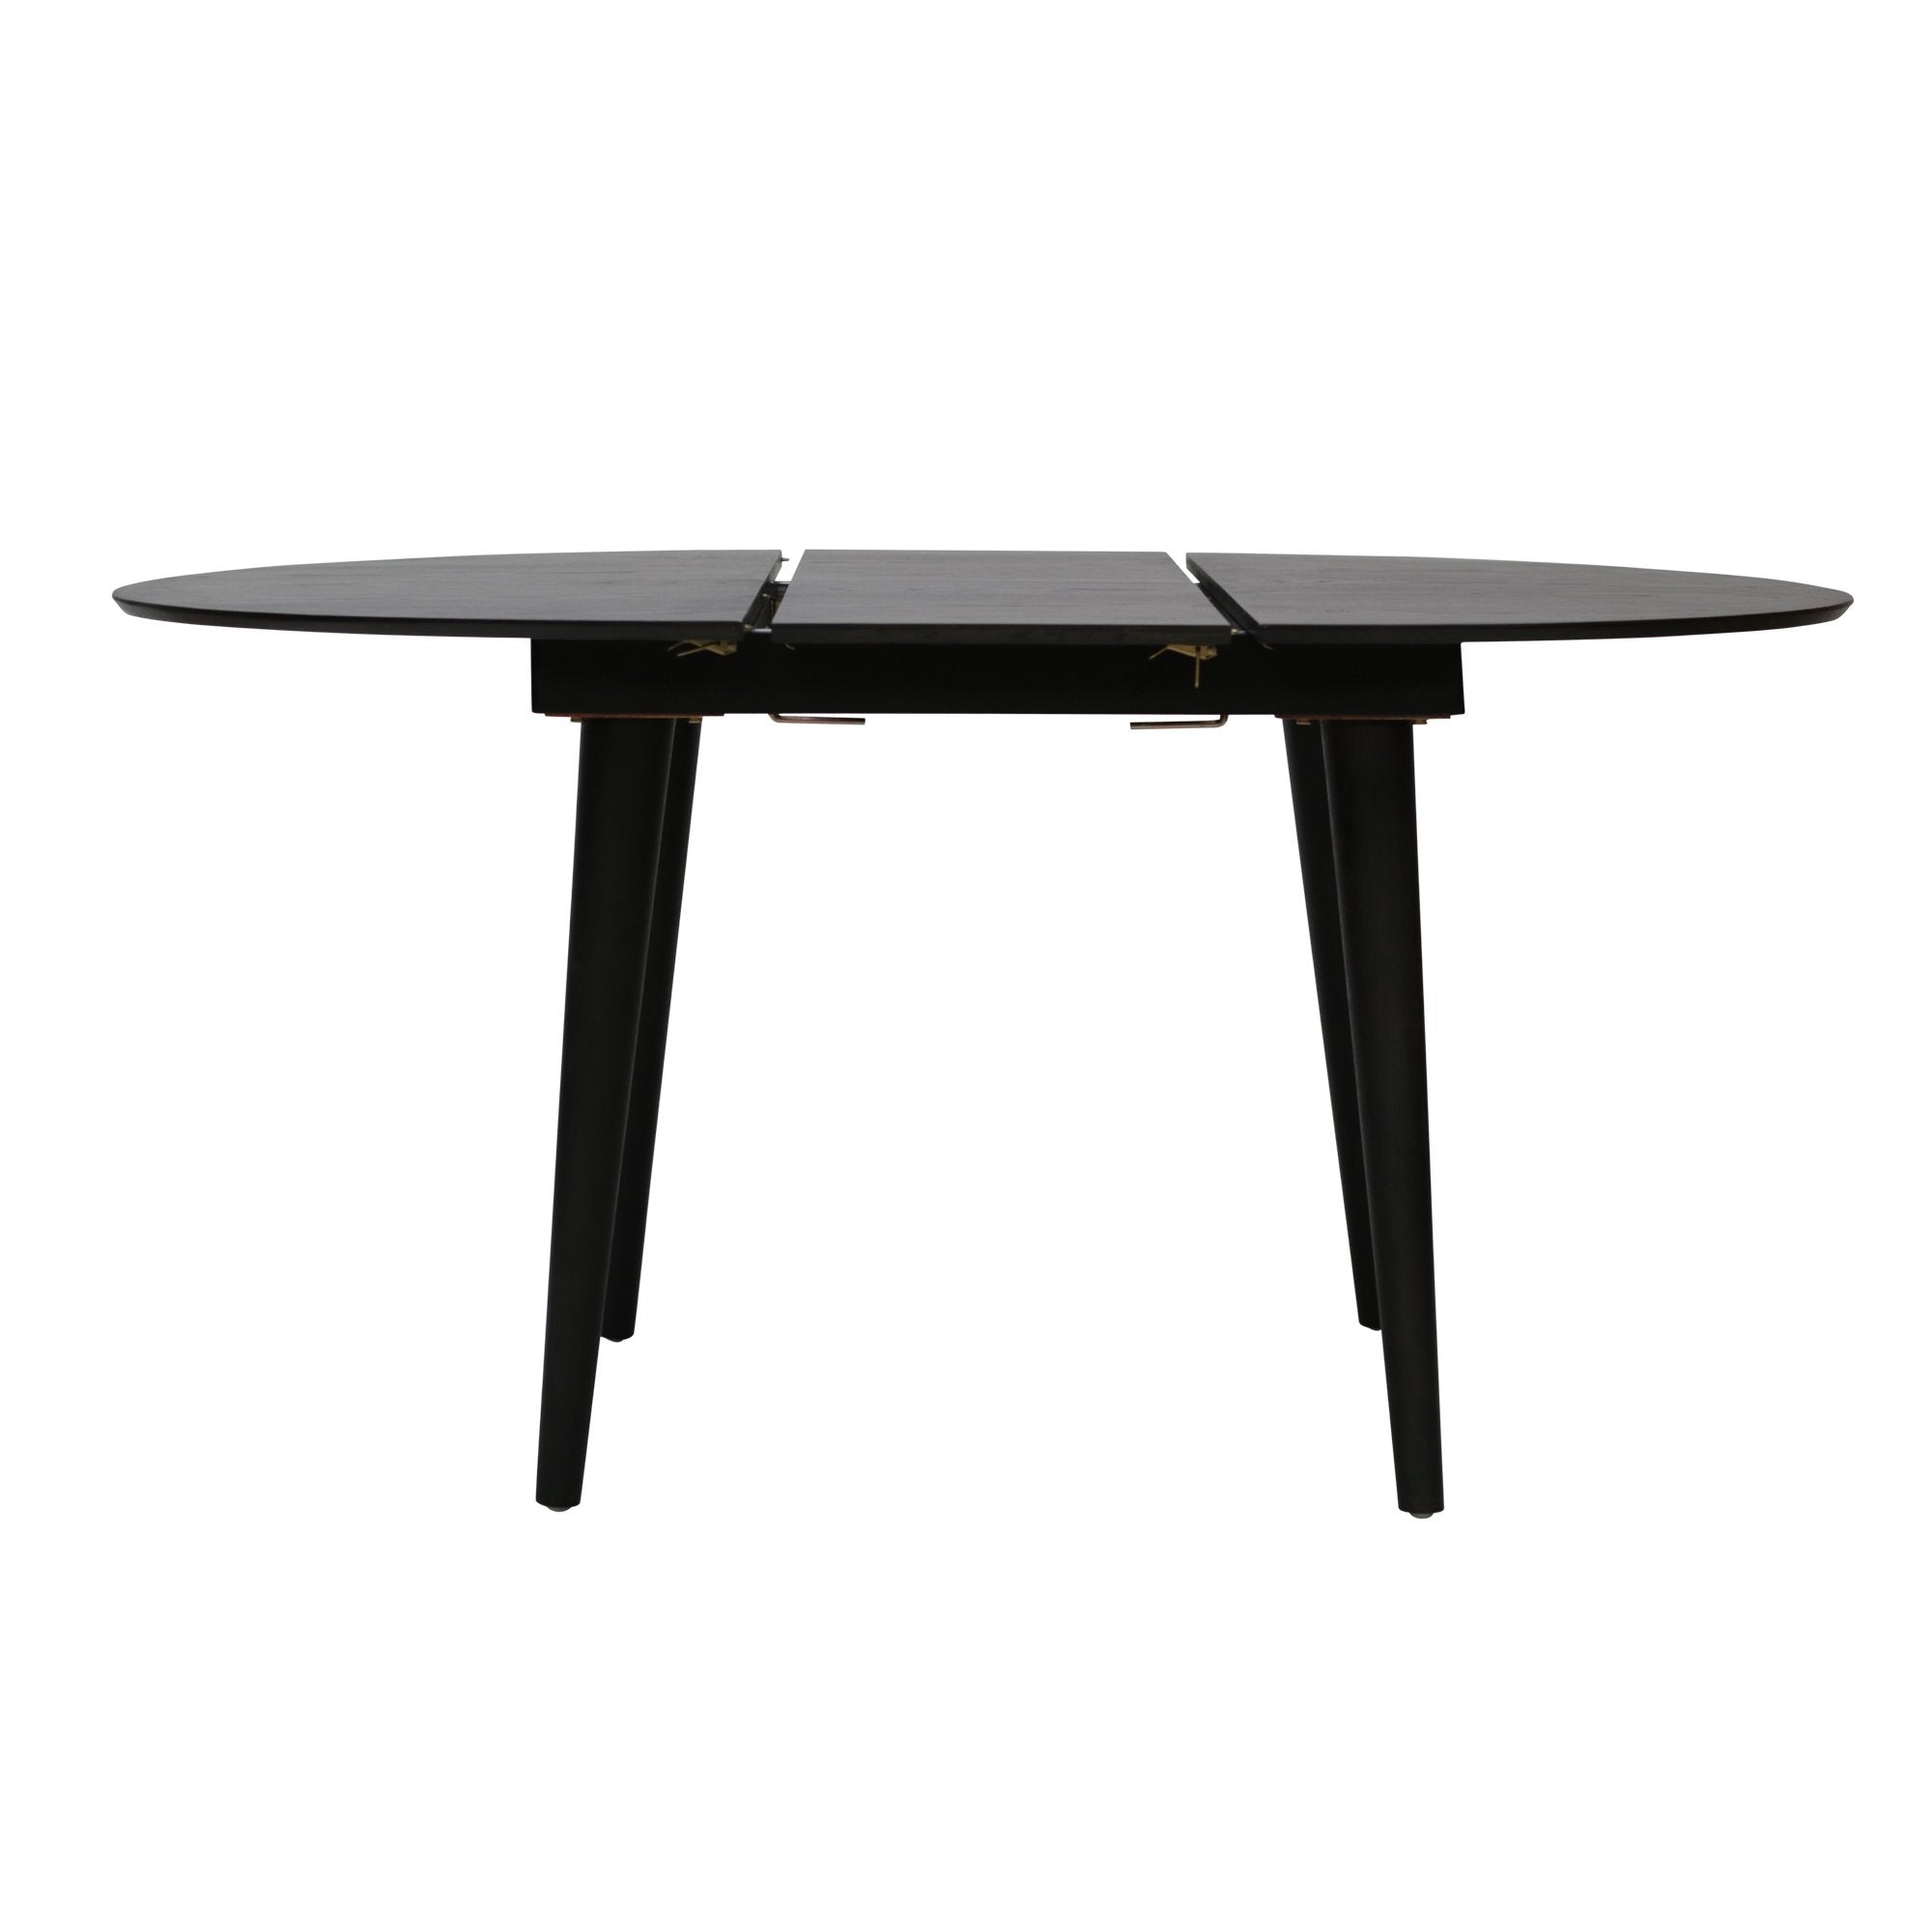 Noche Round Oval Wooden Extension Dining Table 110-145cm - Black Fast shipping On sale